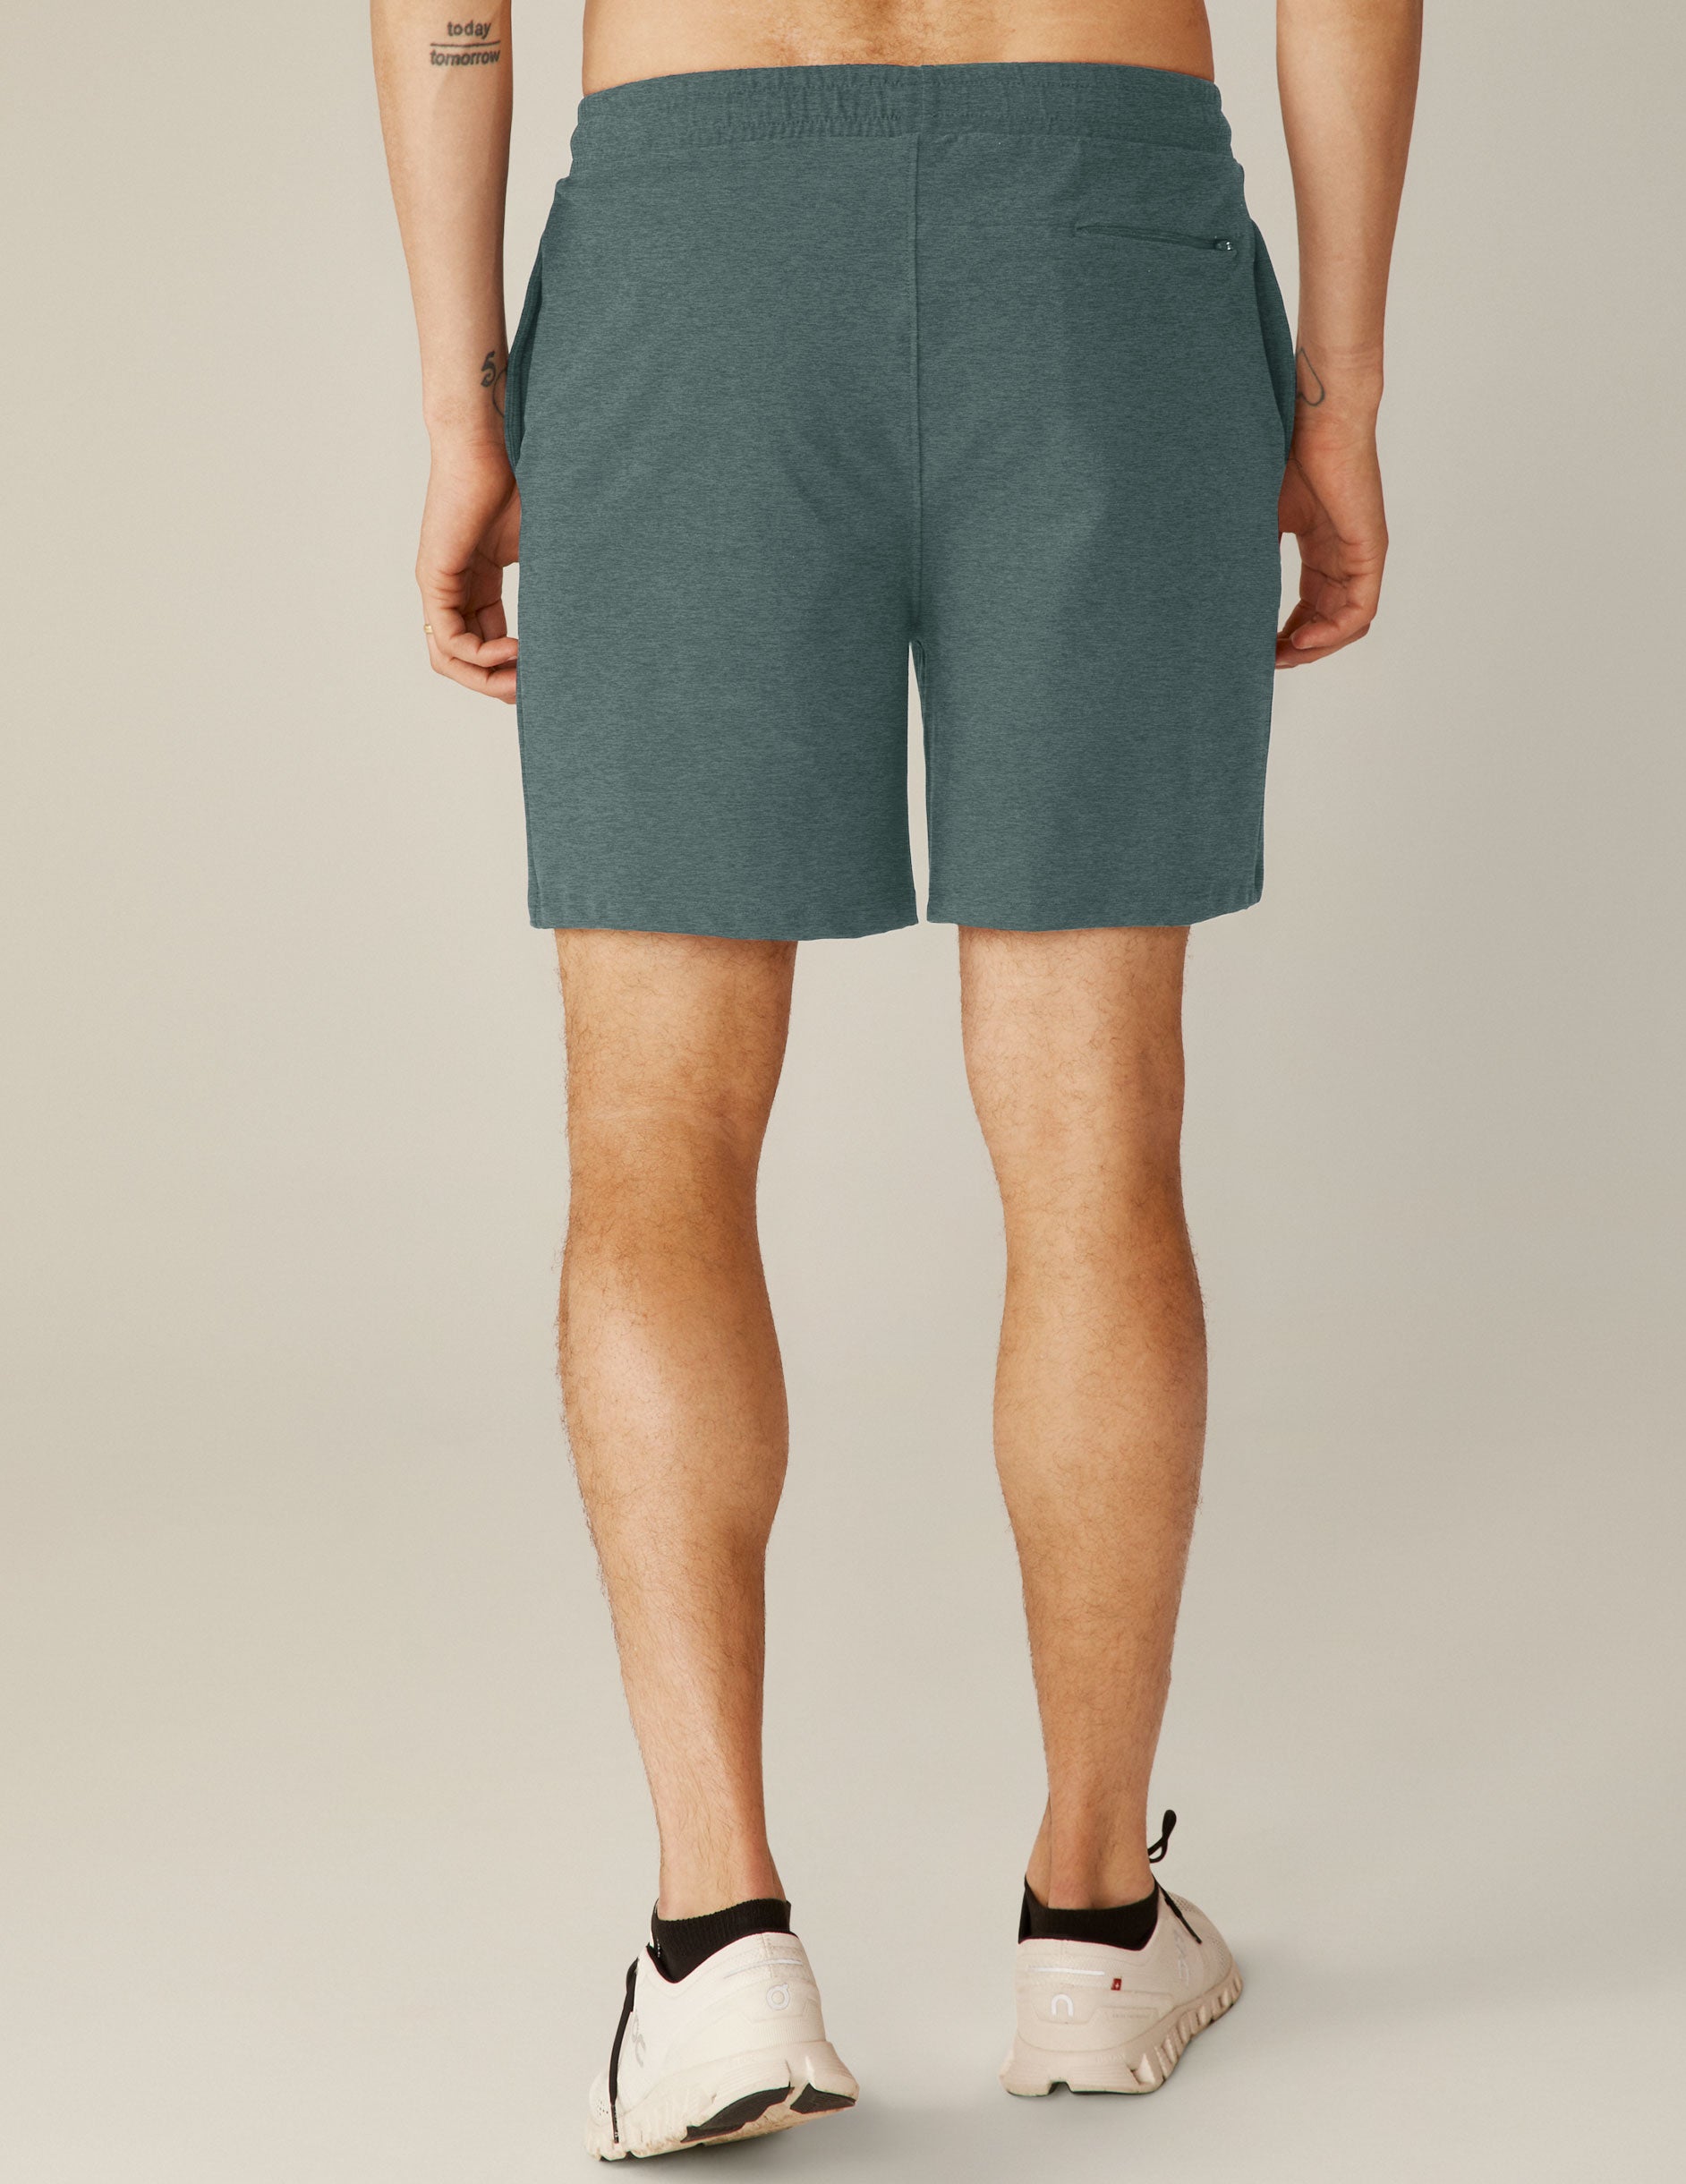 blue men's athleisure shorts with pockets. 